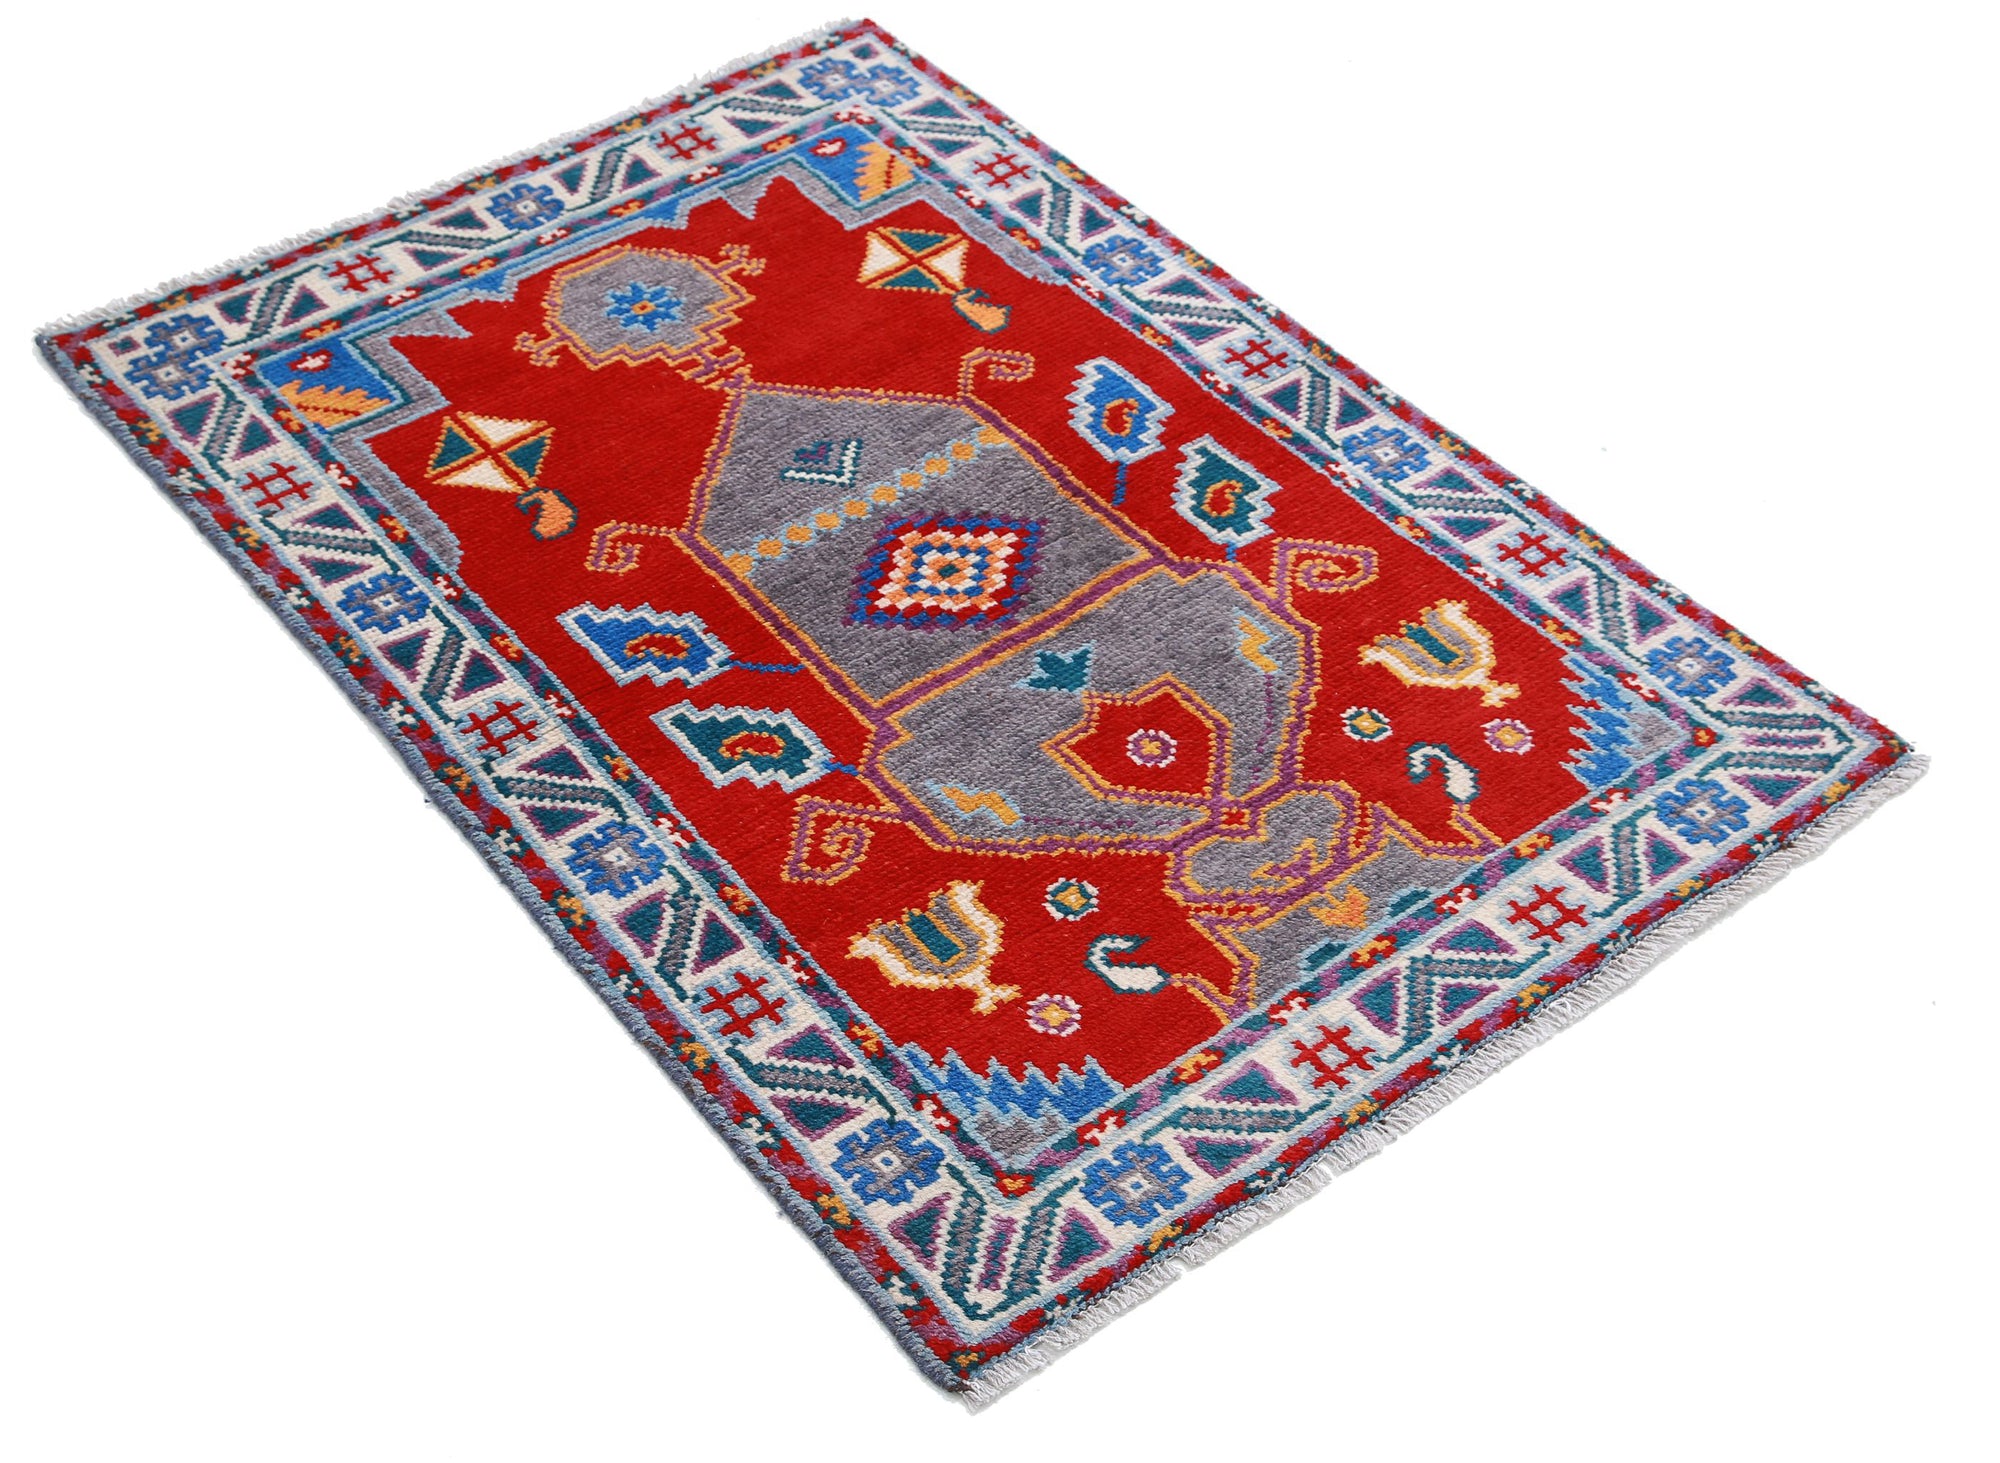 Revival-hand-knotted-qarghani-wool-rug-5014014-1.jpg